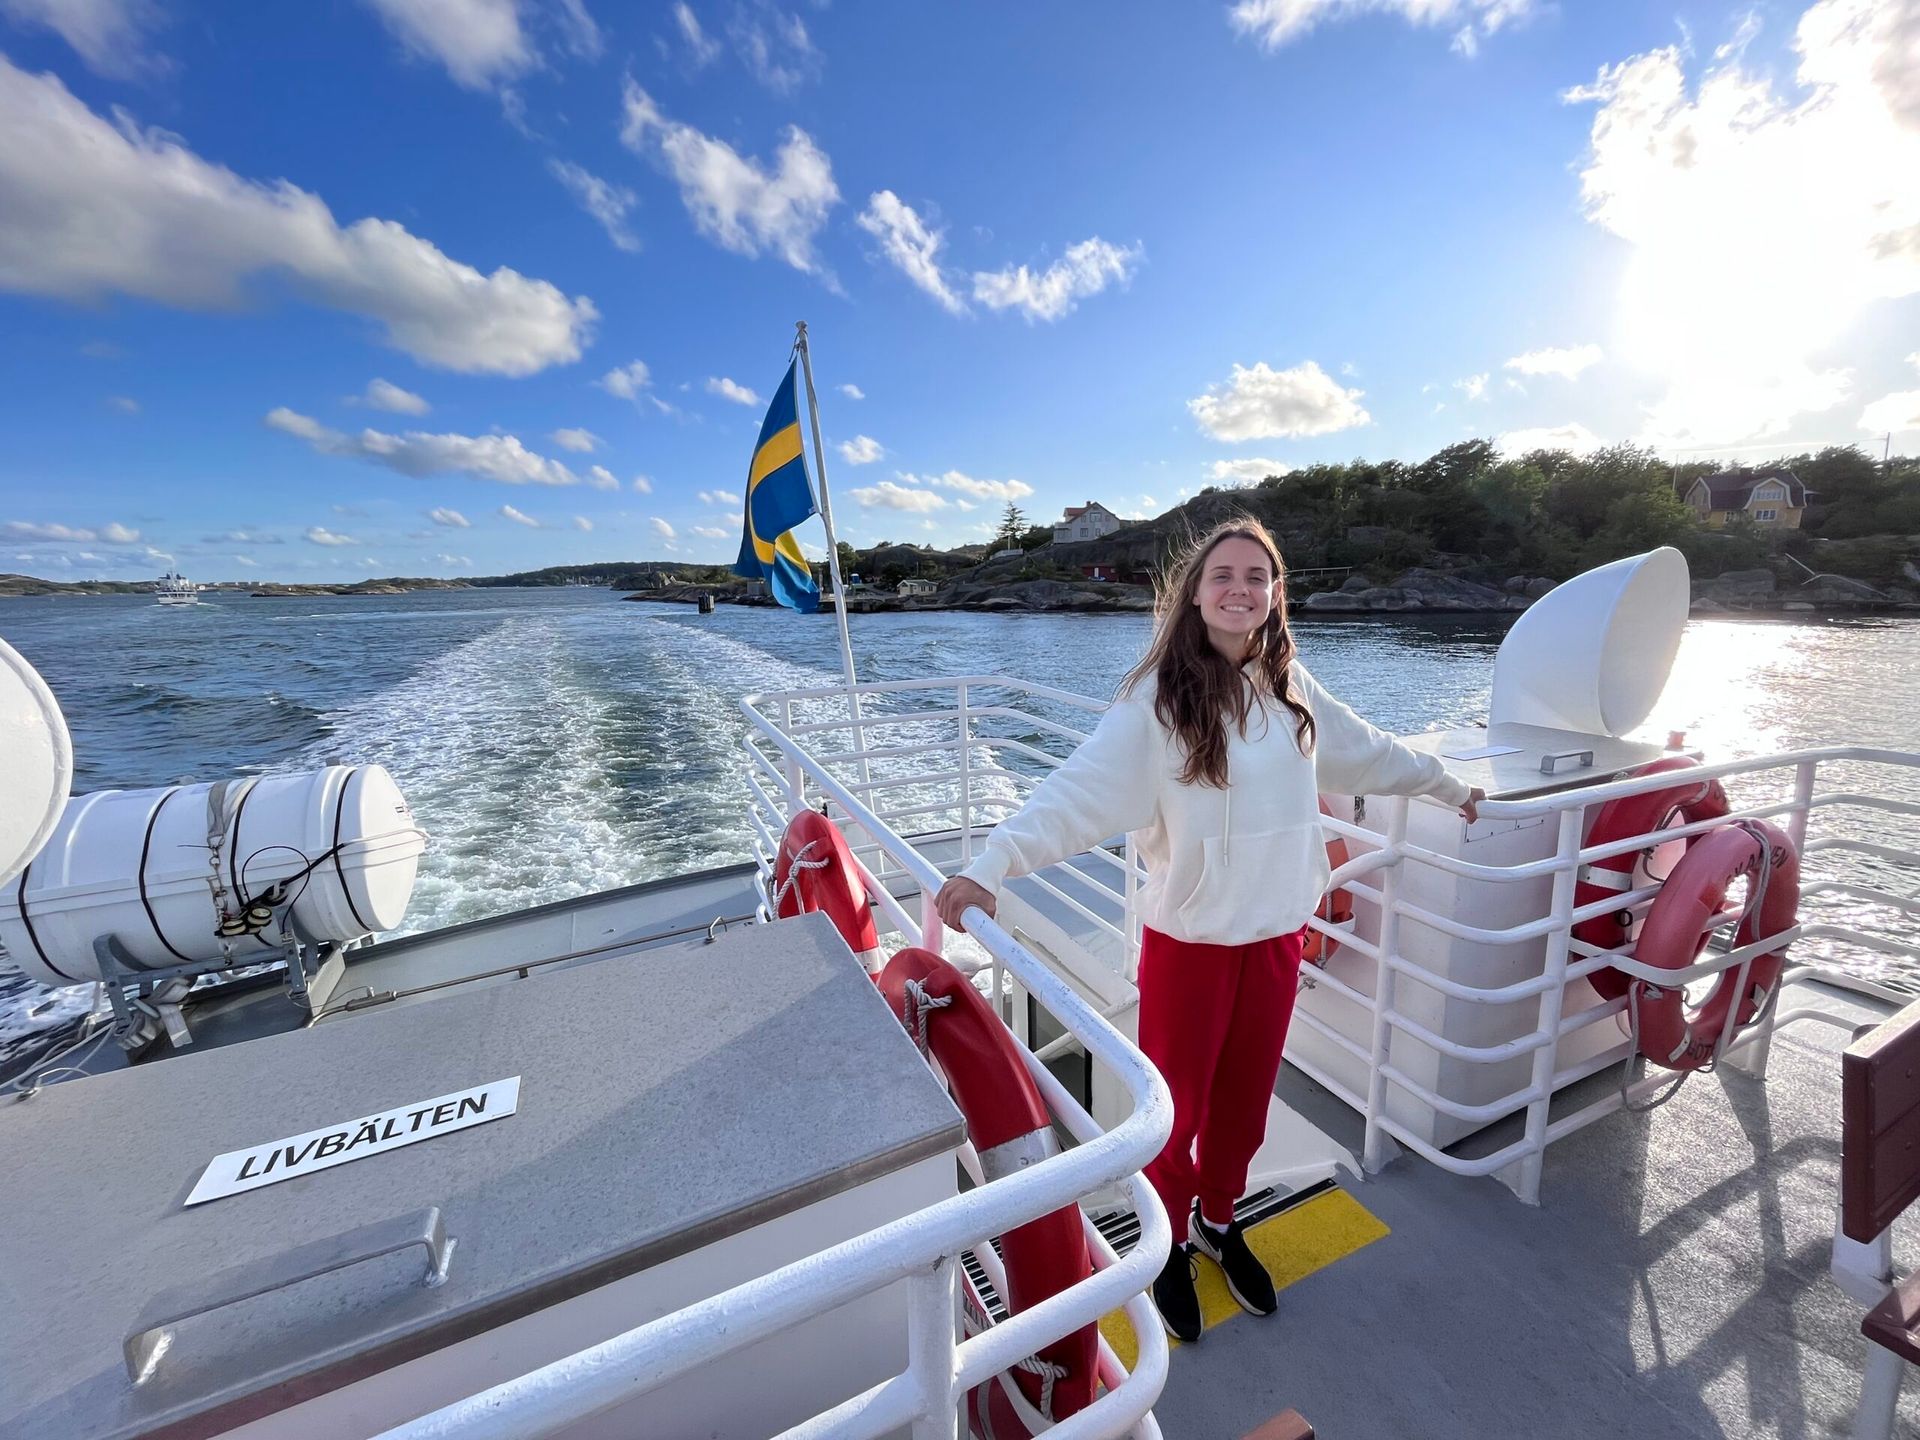 A woman happily smiling on a ferry boat.